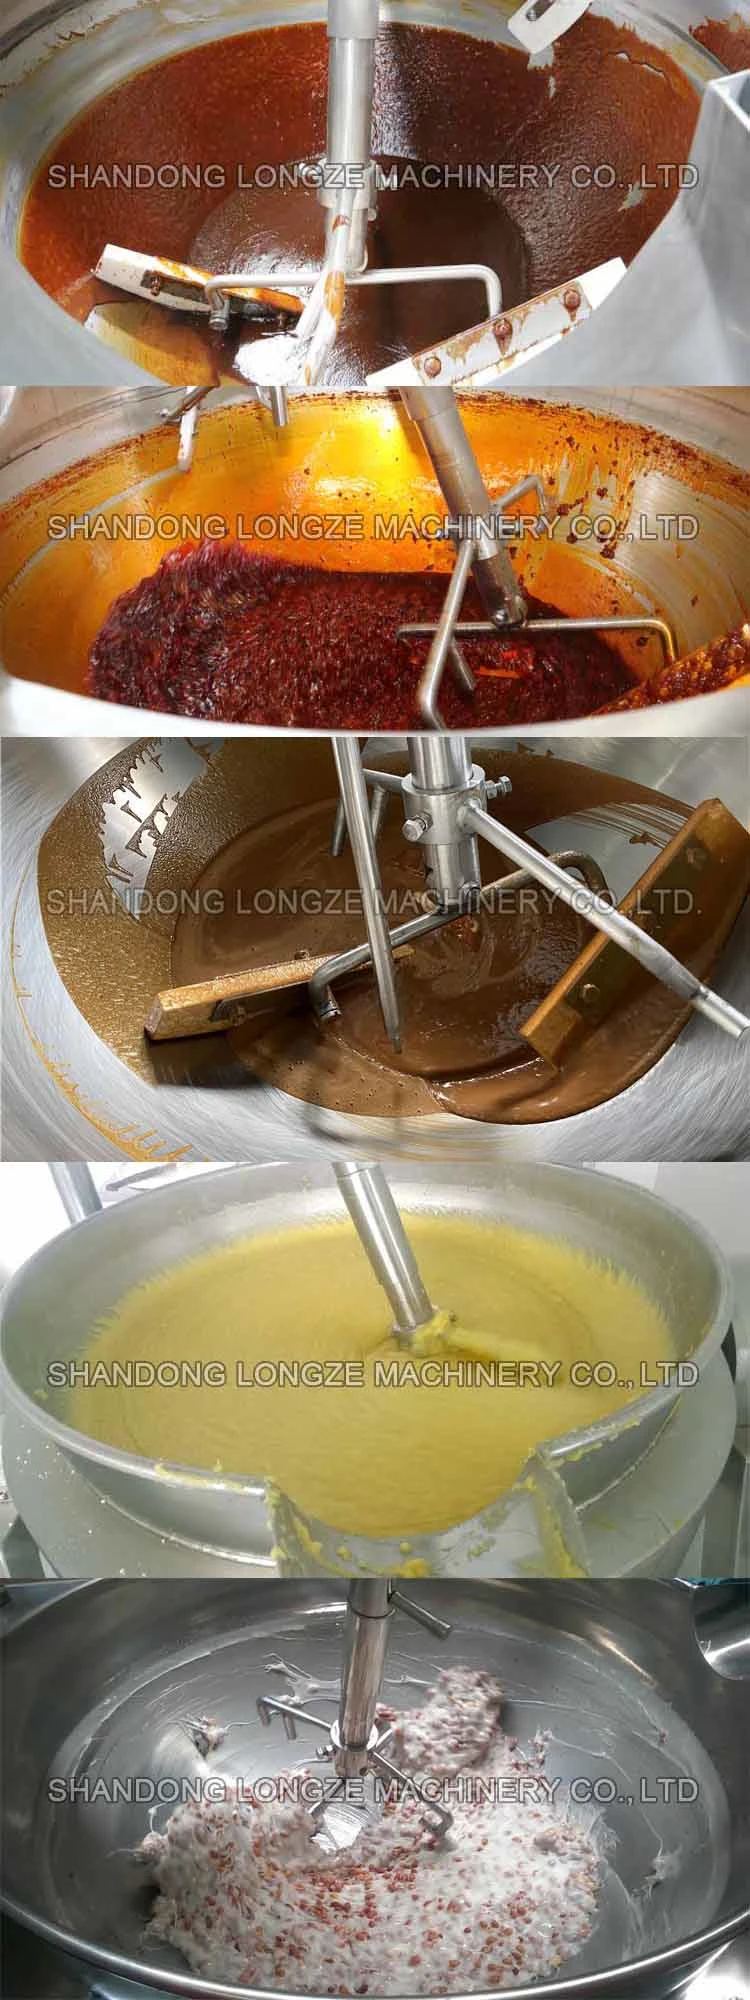 China Factory Tomato Sauce Cooking Mixer Machine Gas Cooking Kettle with Mixer Industrial Cooking Machine Mixer